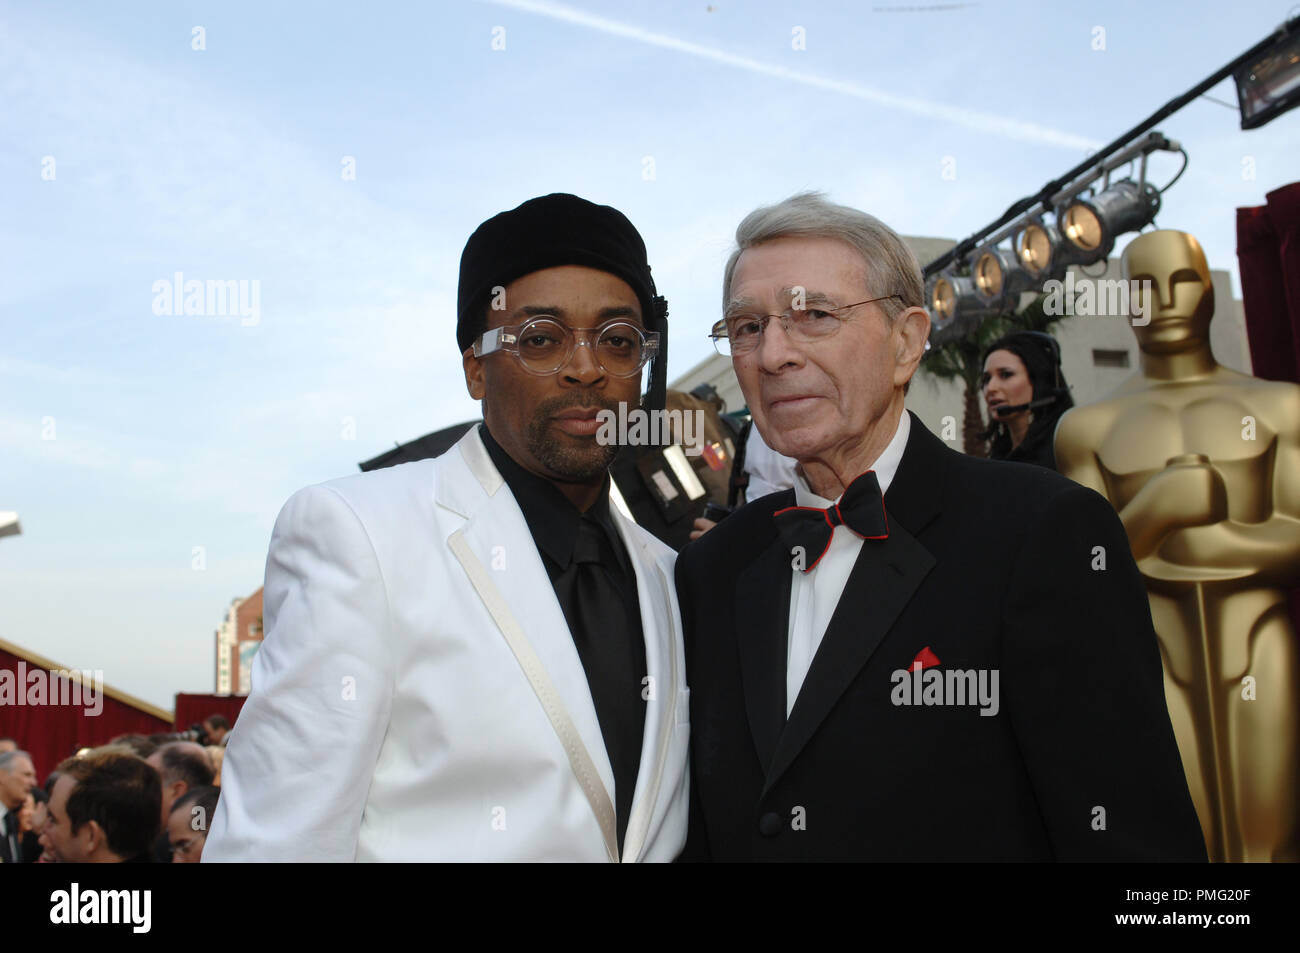 The Academy of Motion Picture Arts and Sciences Presents Director Spike Lee poses with Army Archerd before the 77th Annual Academy Awards at the Kodak Theatre in Hollywood, CA on Sunday, February 27, 2005.  File Reference # 29997 058  For Editorial Use Only -  All Rights Reserved Stock Photo